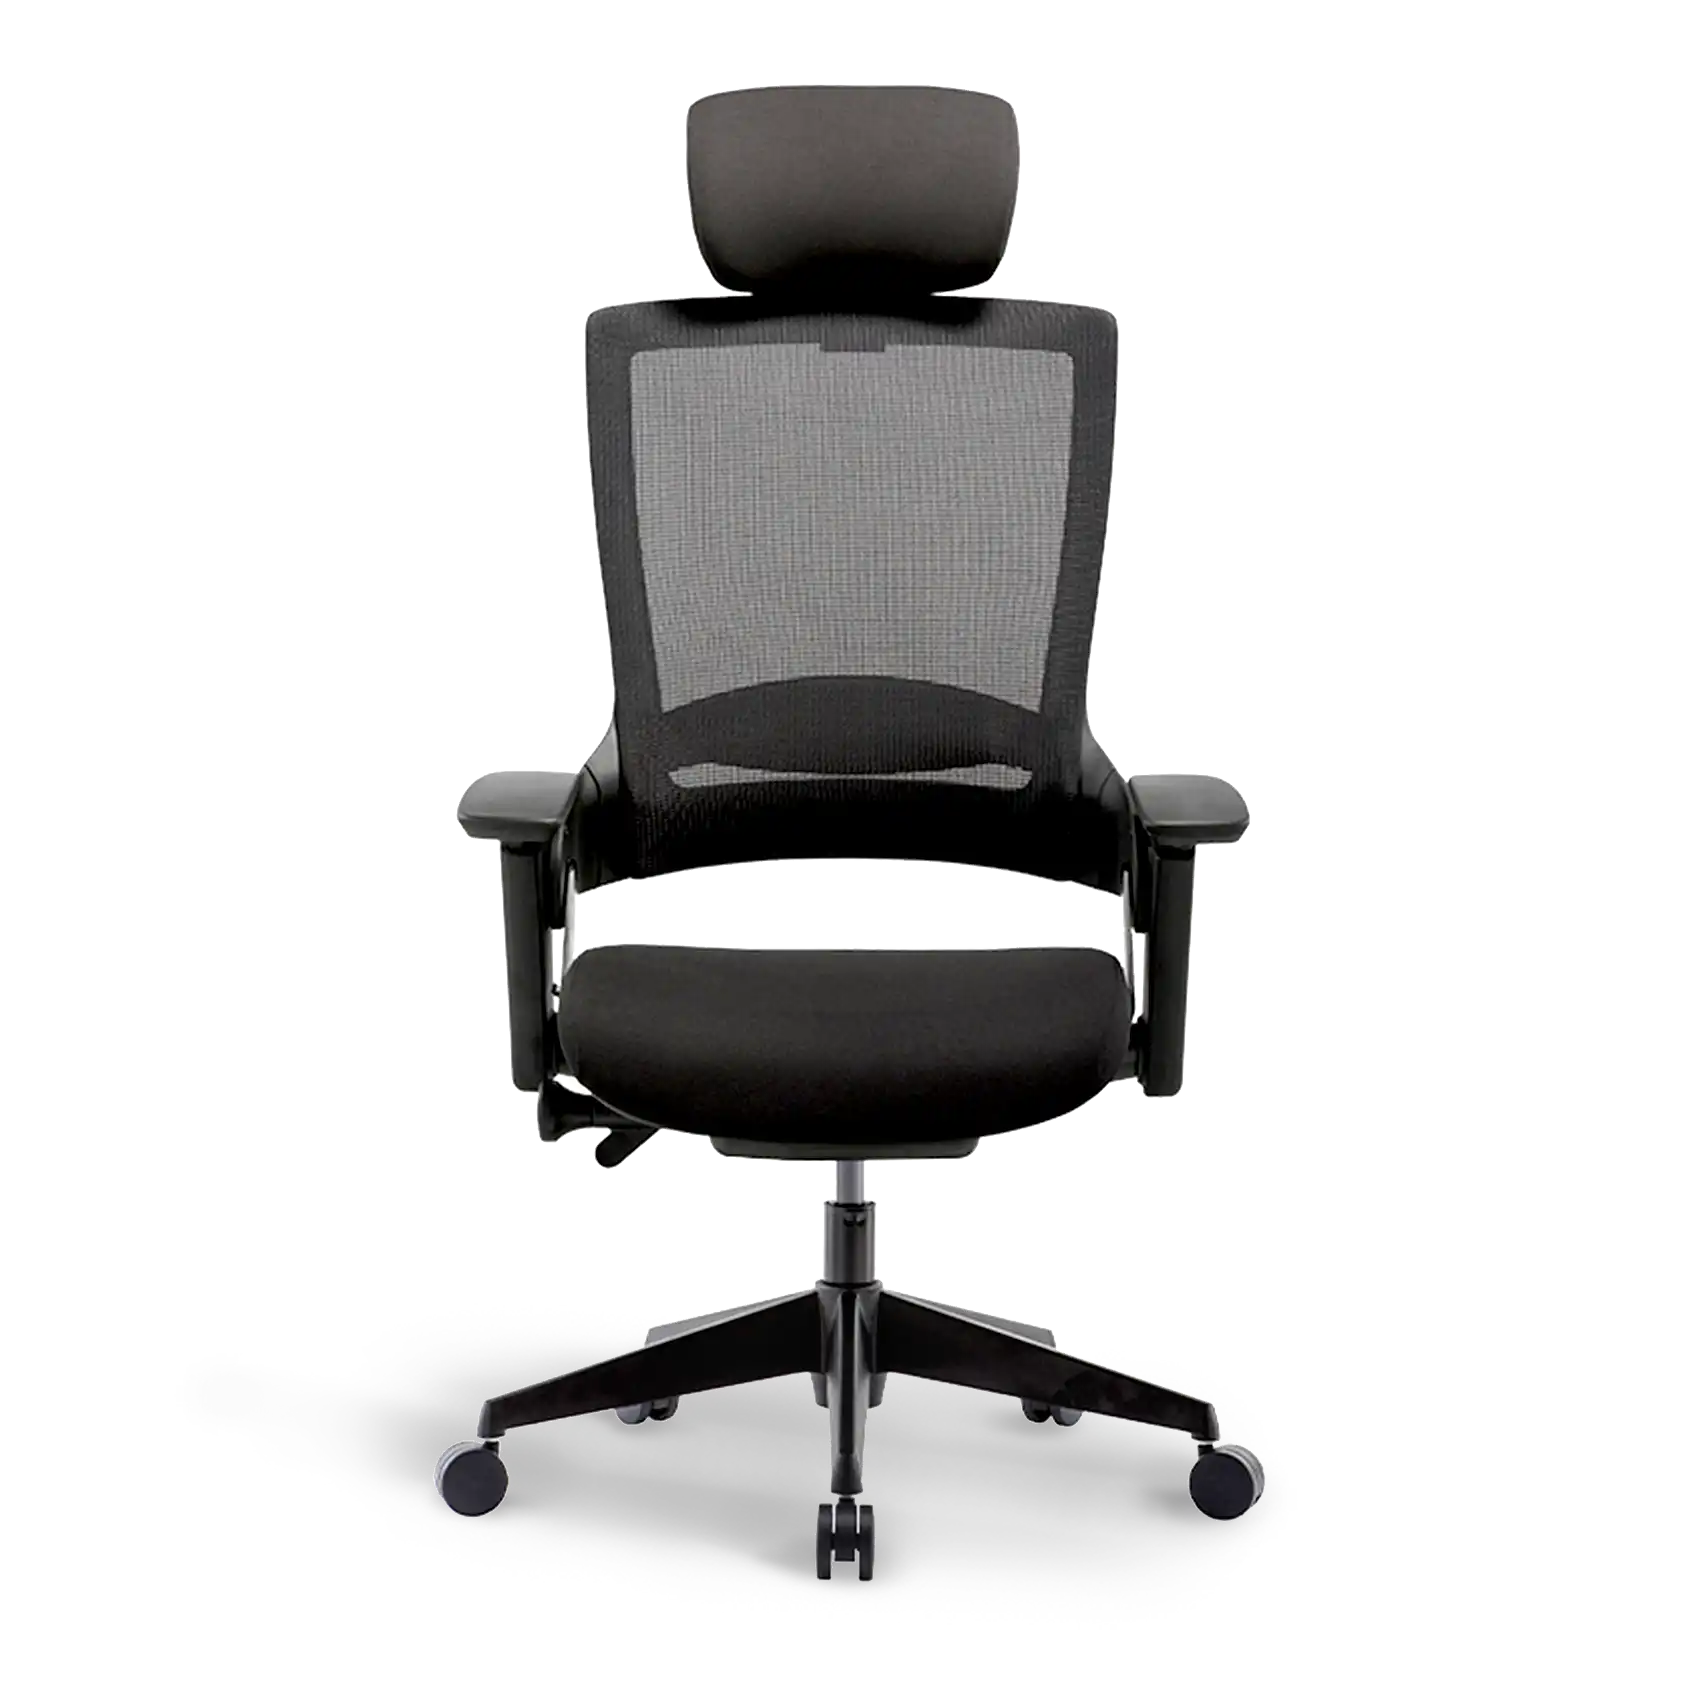 Back view of Flujo Angulo ergonomic chair with lumbar support in black